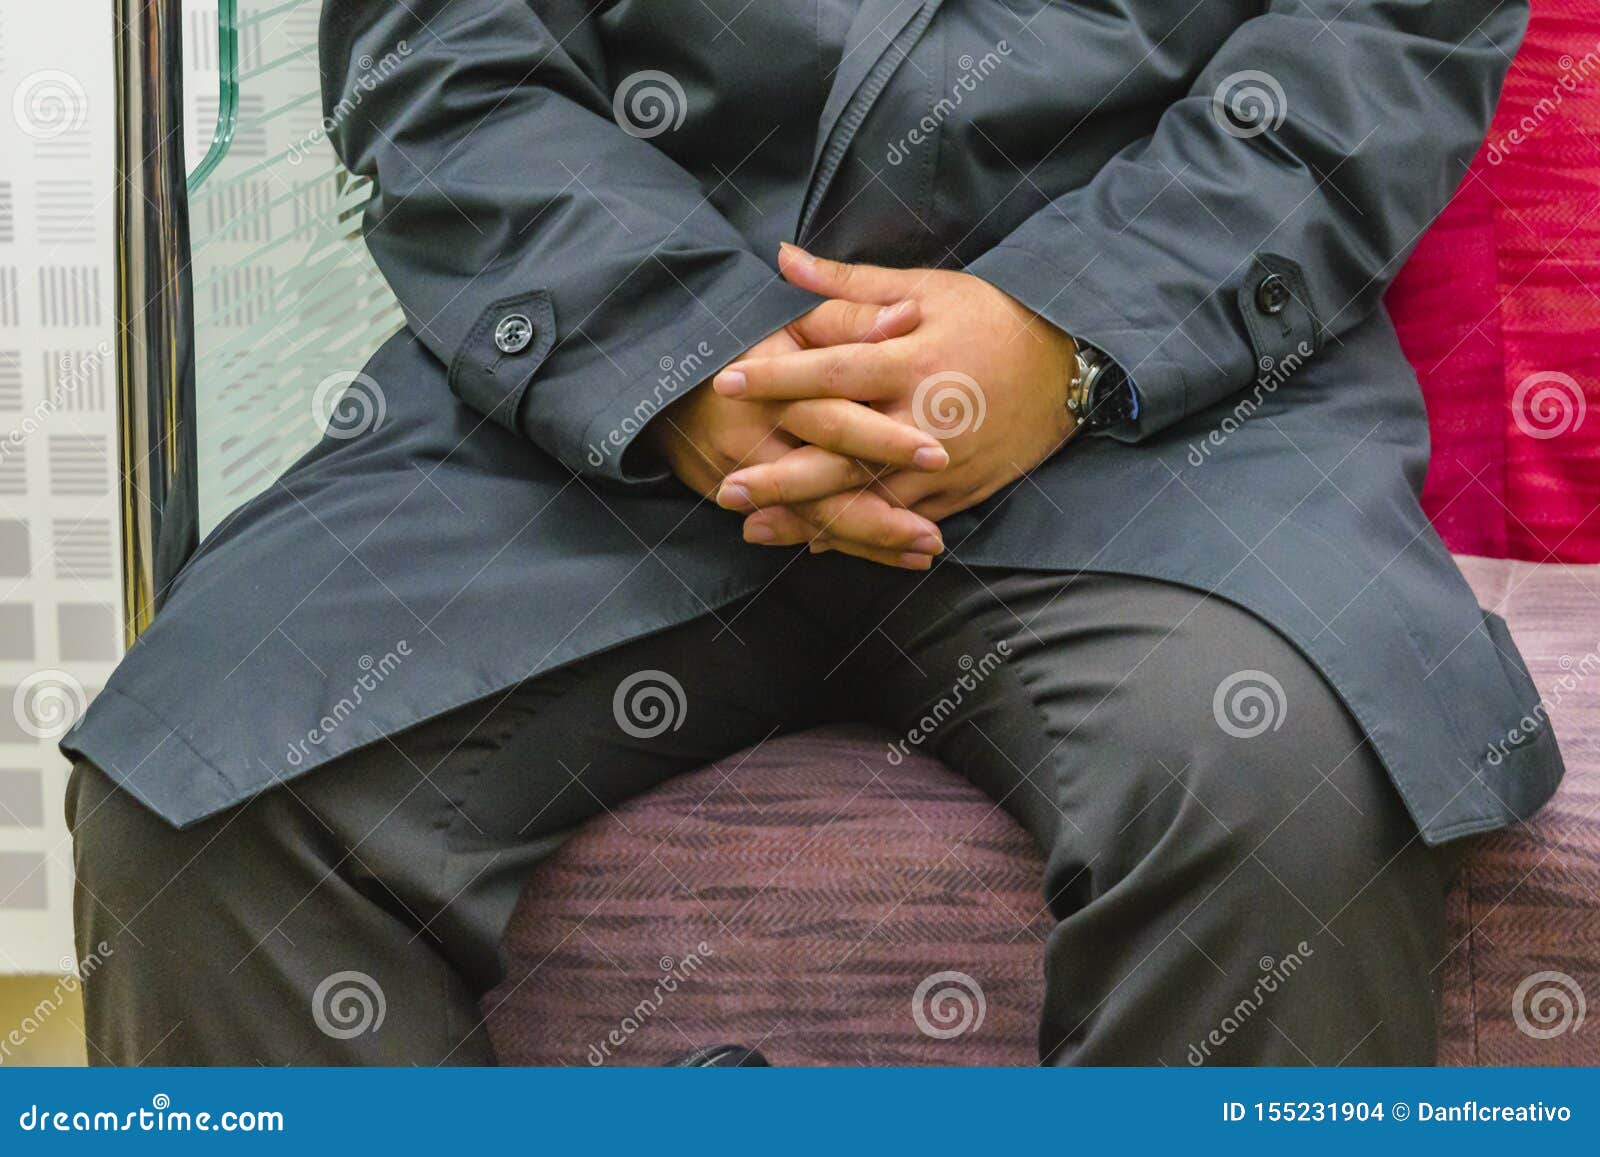 Fat Man Sitting at Train, Japan Editorial Stock Image - Image of hands ...